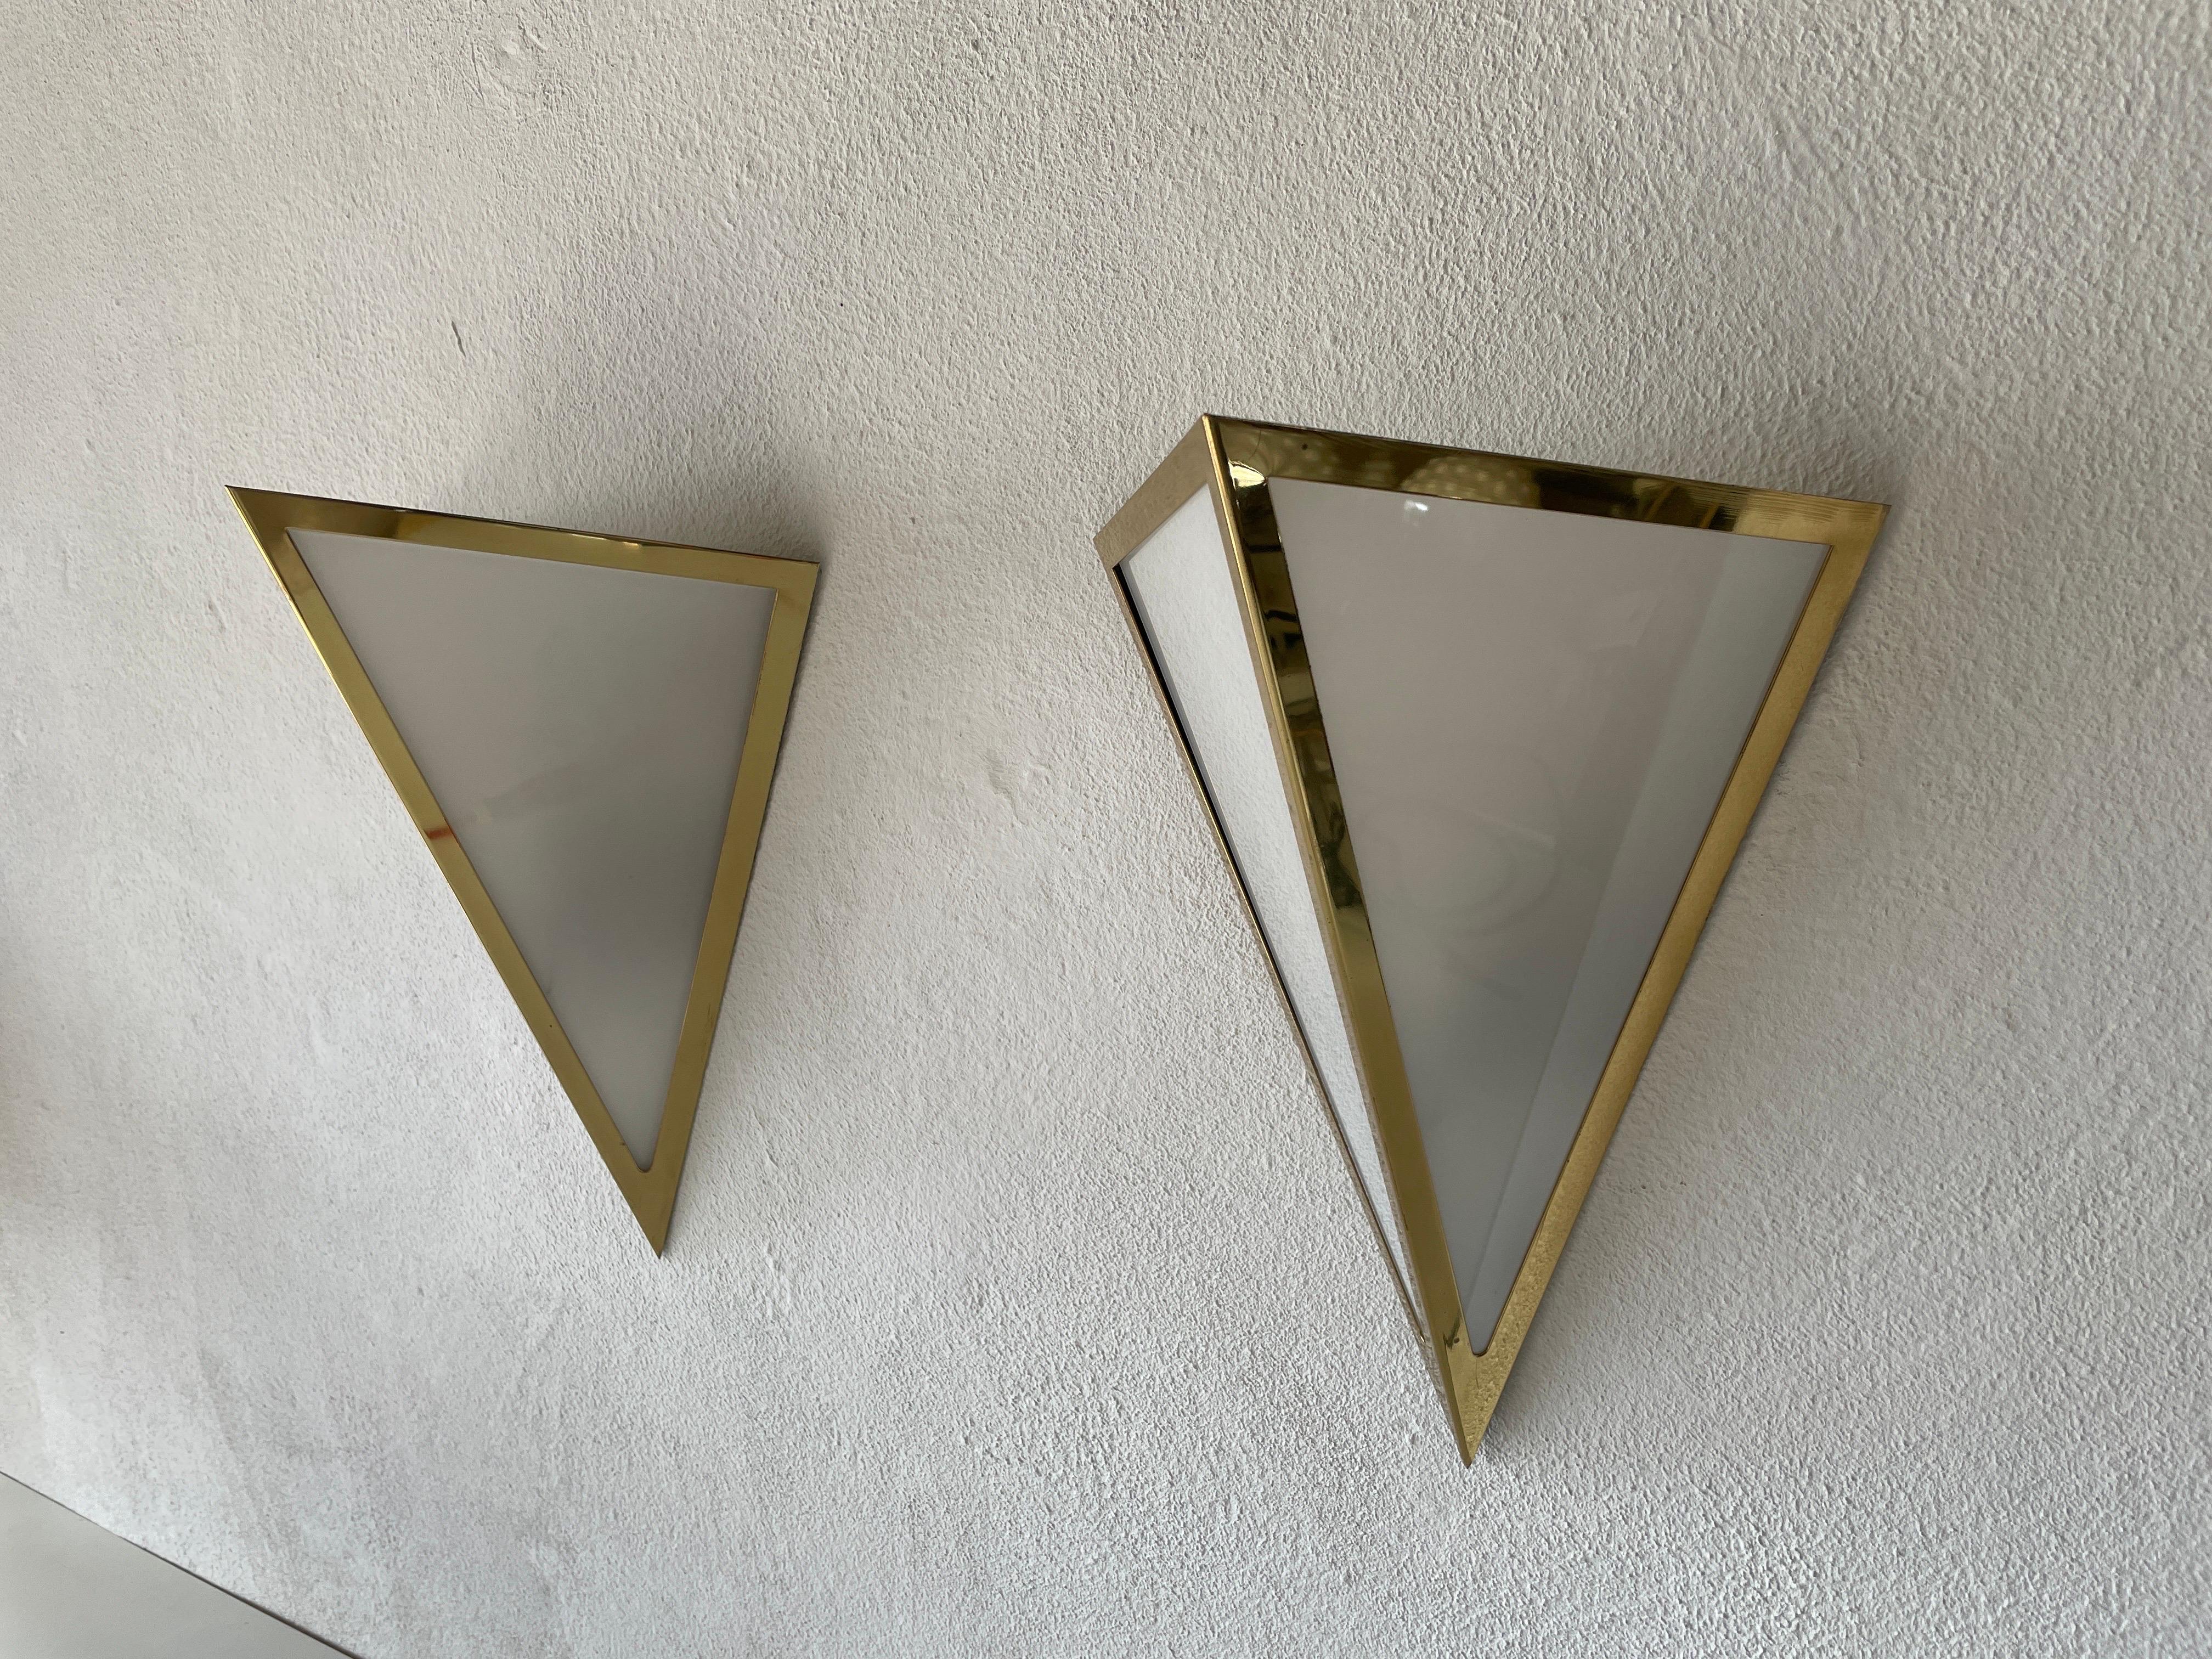 Late 20th Century Triangle Design Opal Glass and Gold Metal Pair of Sconces by WKR, 1970s, Germany For Sale